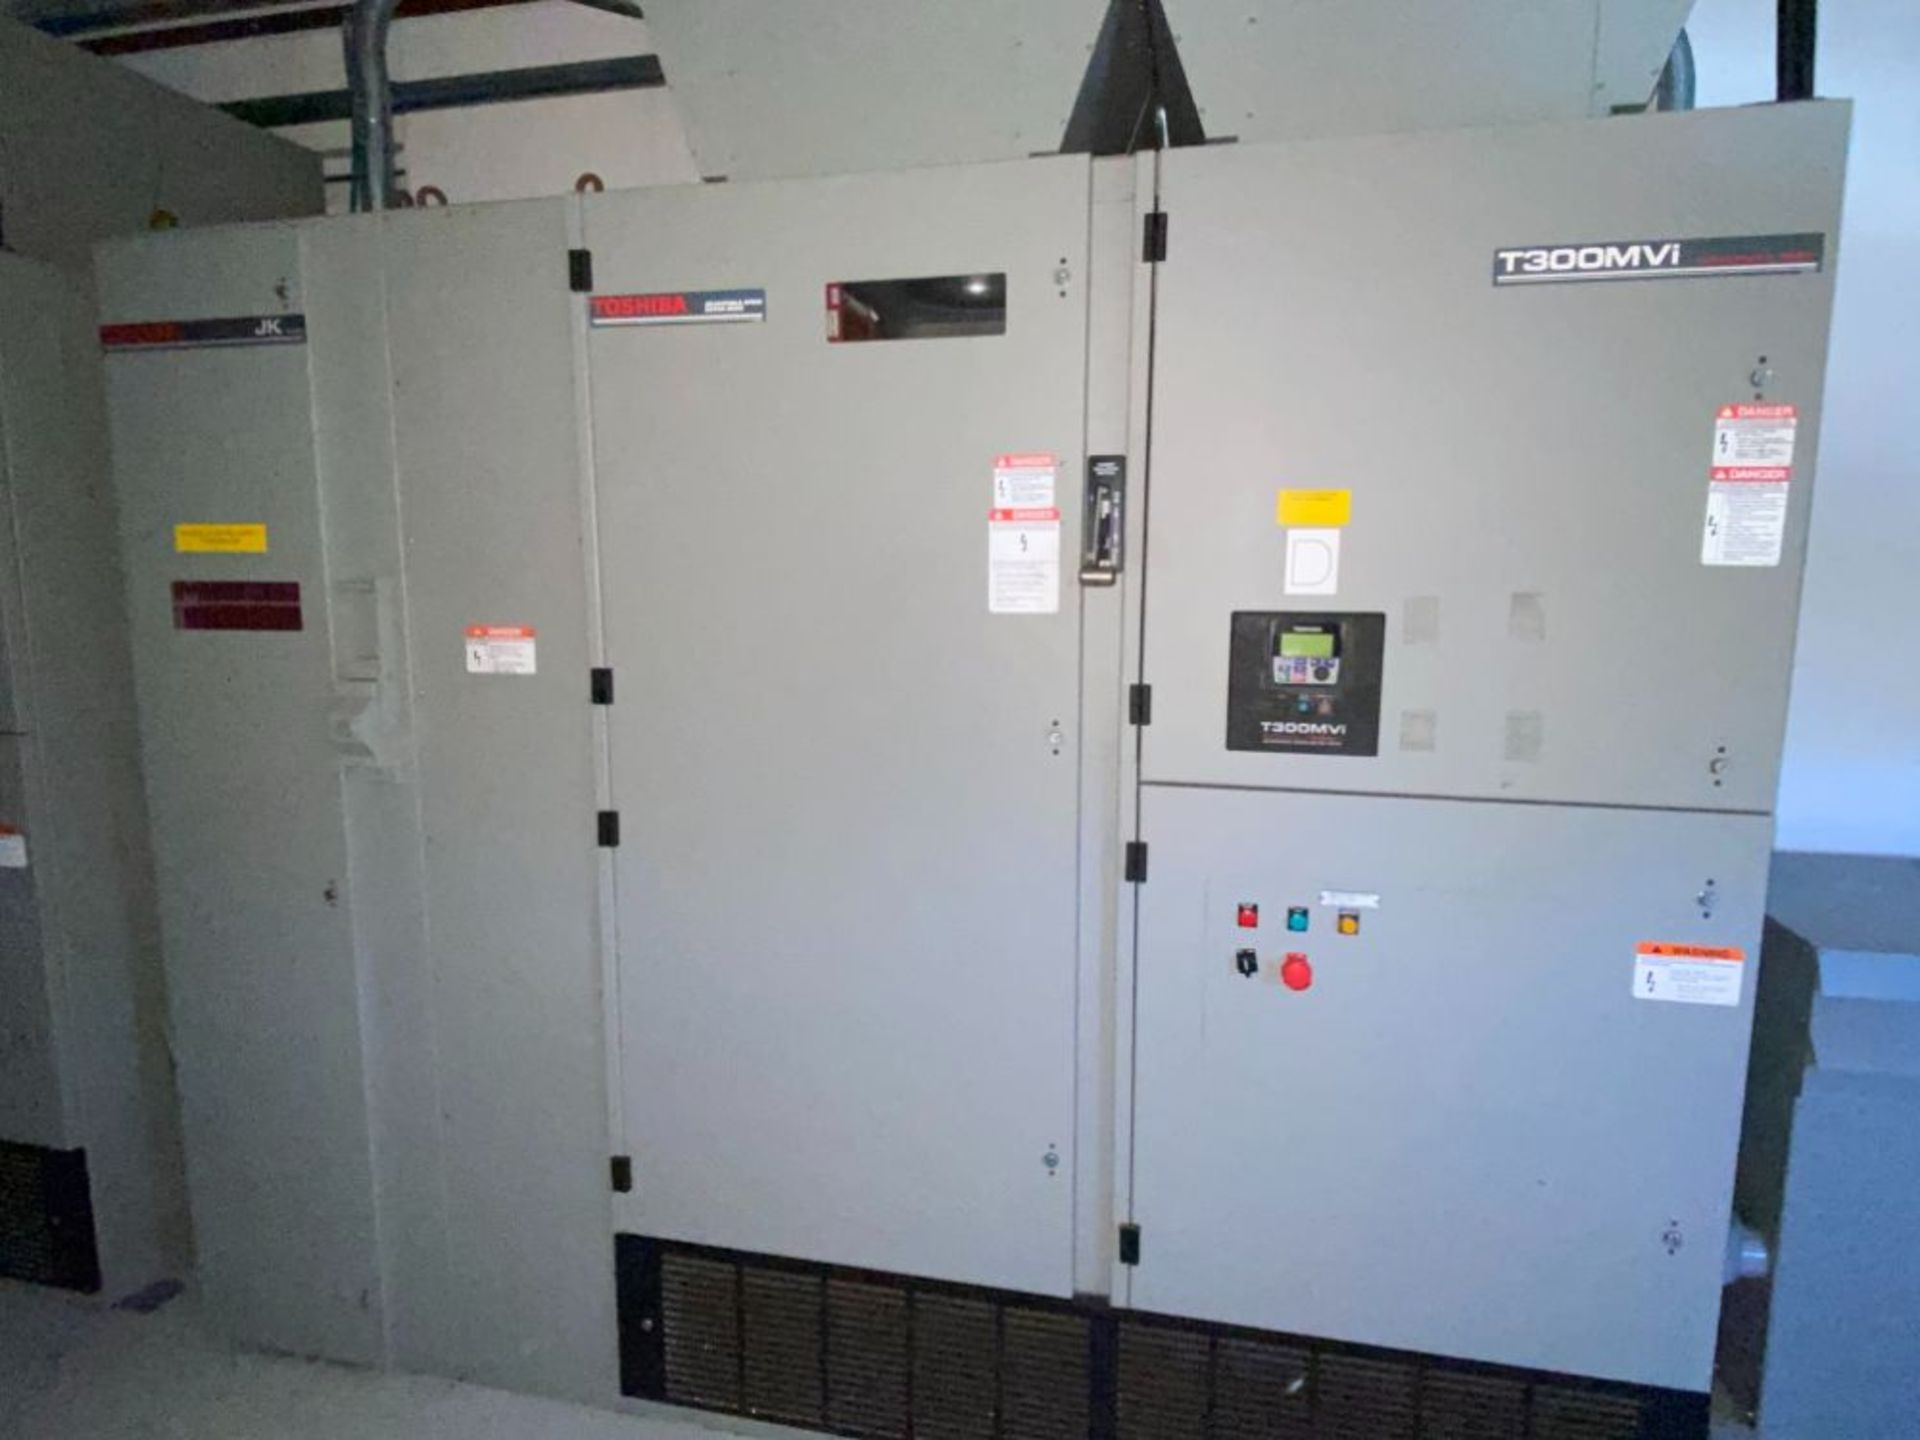 SWITCHGEAR BUILDING, W/ CONTENTS TO INCLUDE: (4) TOSHIBA T300MVI 600 HP VARIABLE FREQUENCY DRIVES - Image 2 of 7